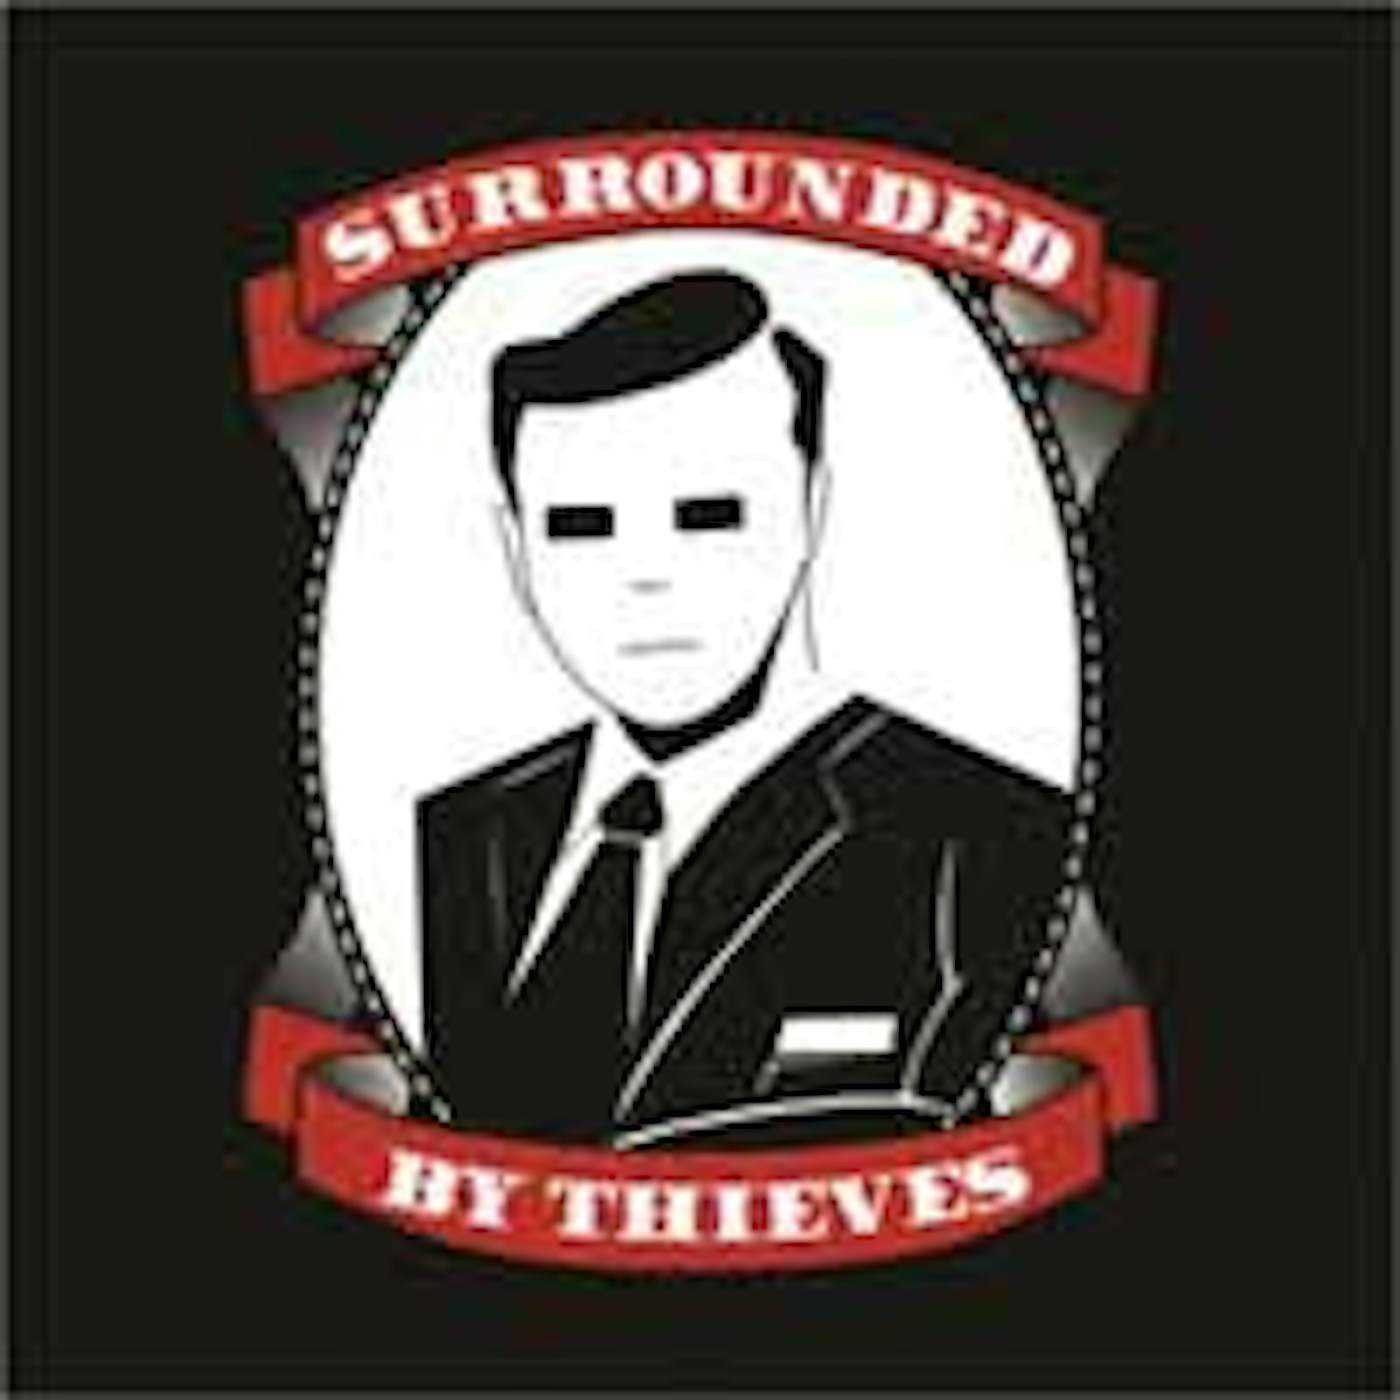 Surrounded By Thieves LP - S/T (Vinyl)